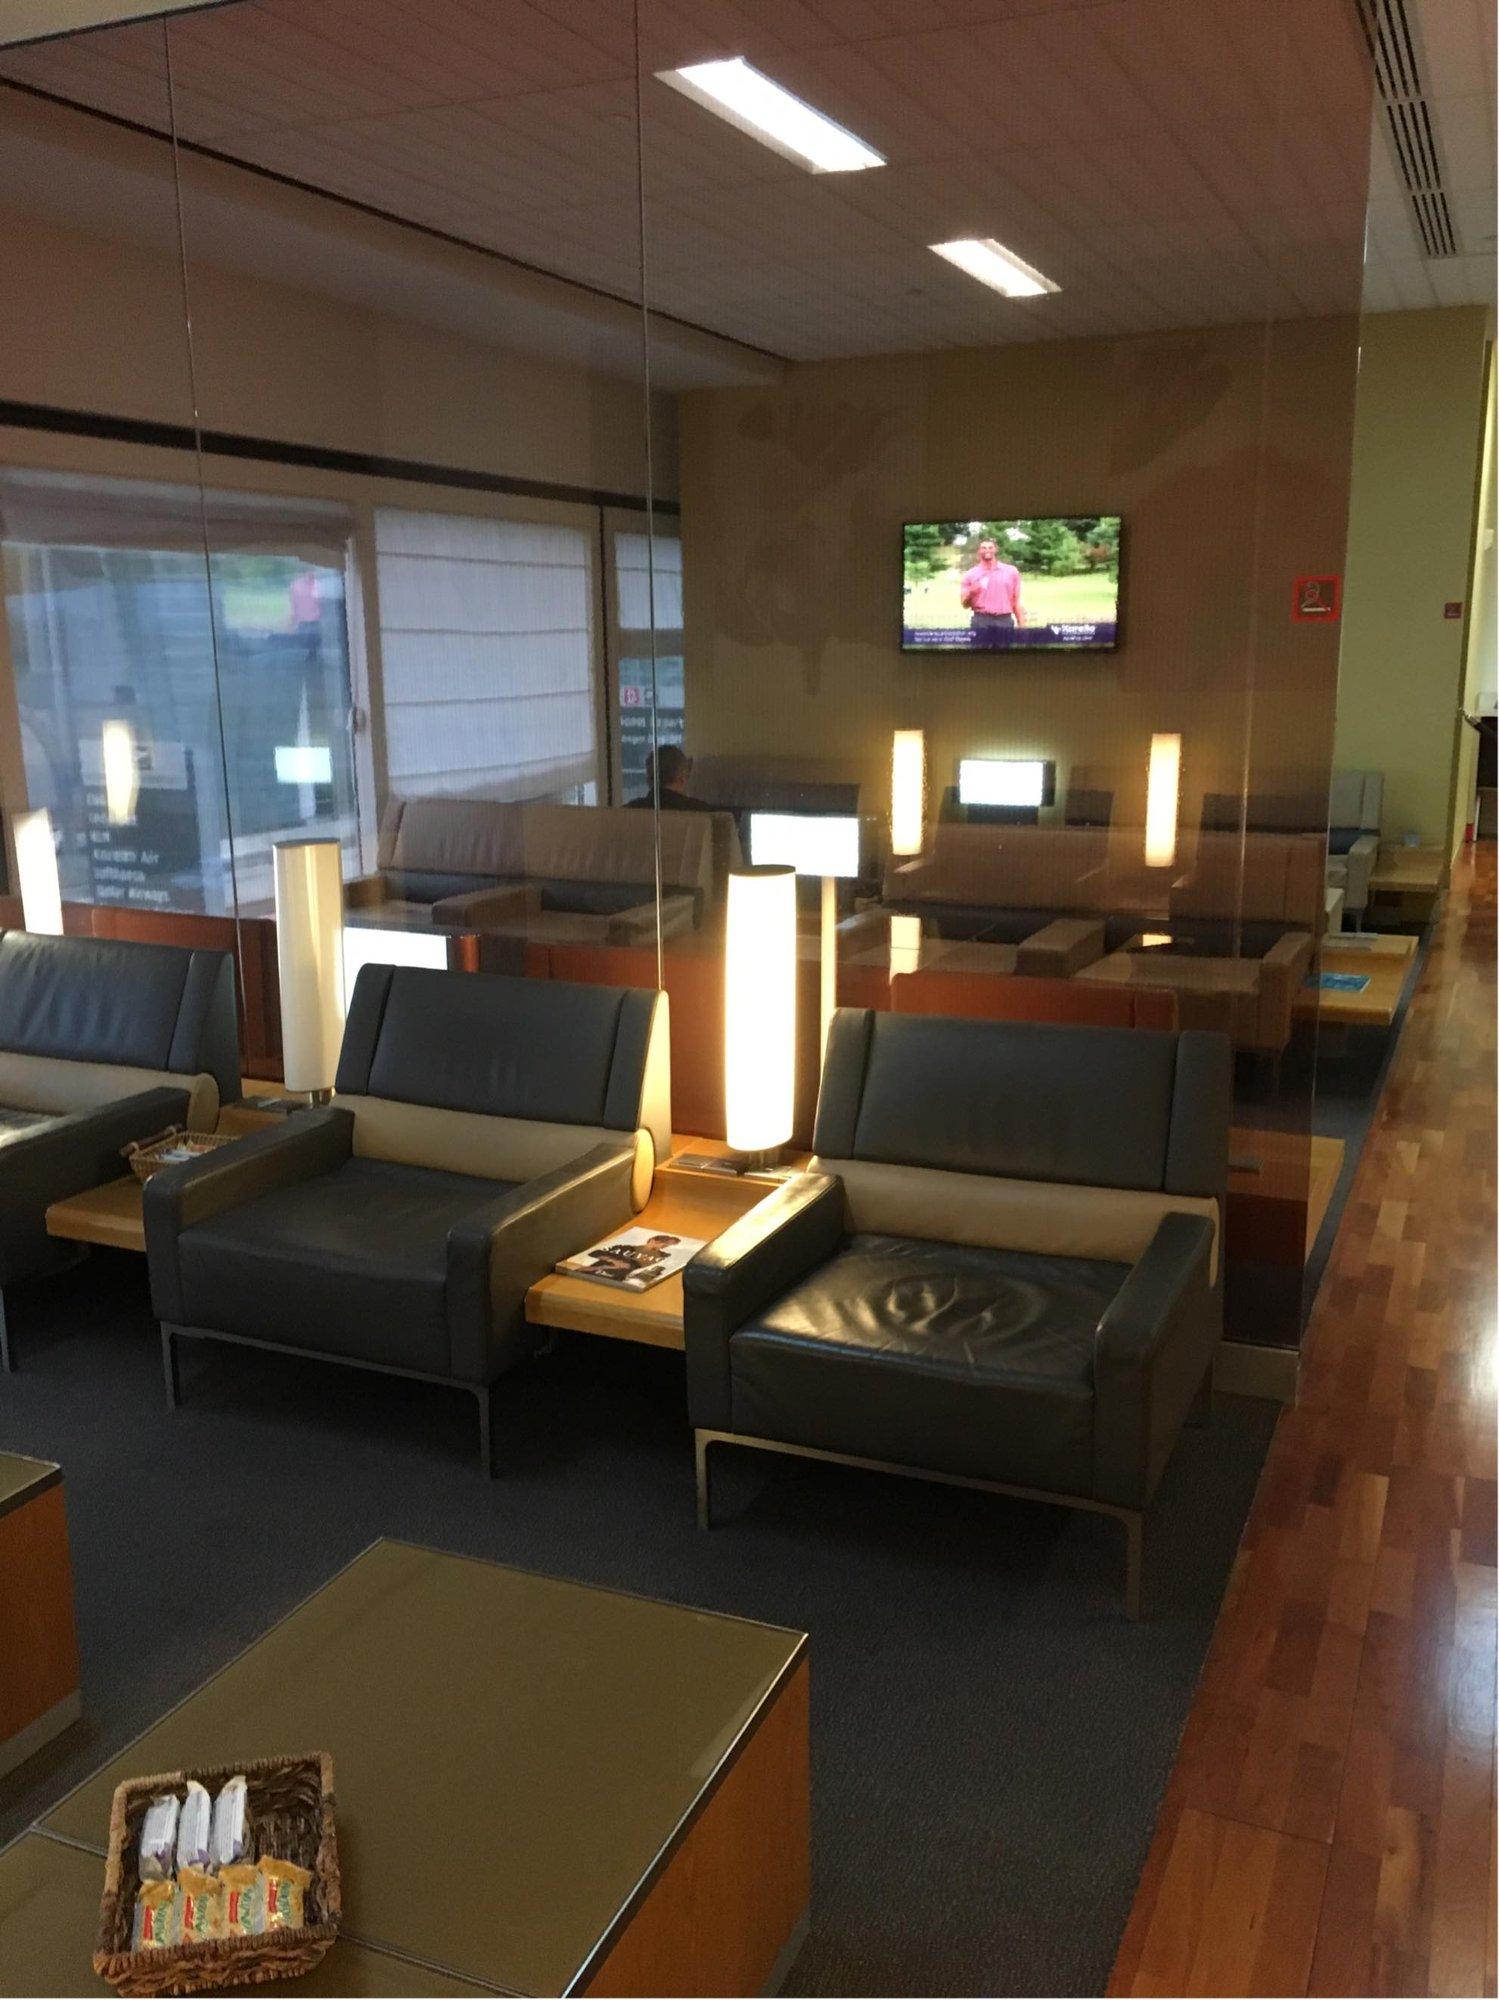 Air France Lounge image 6 of 31